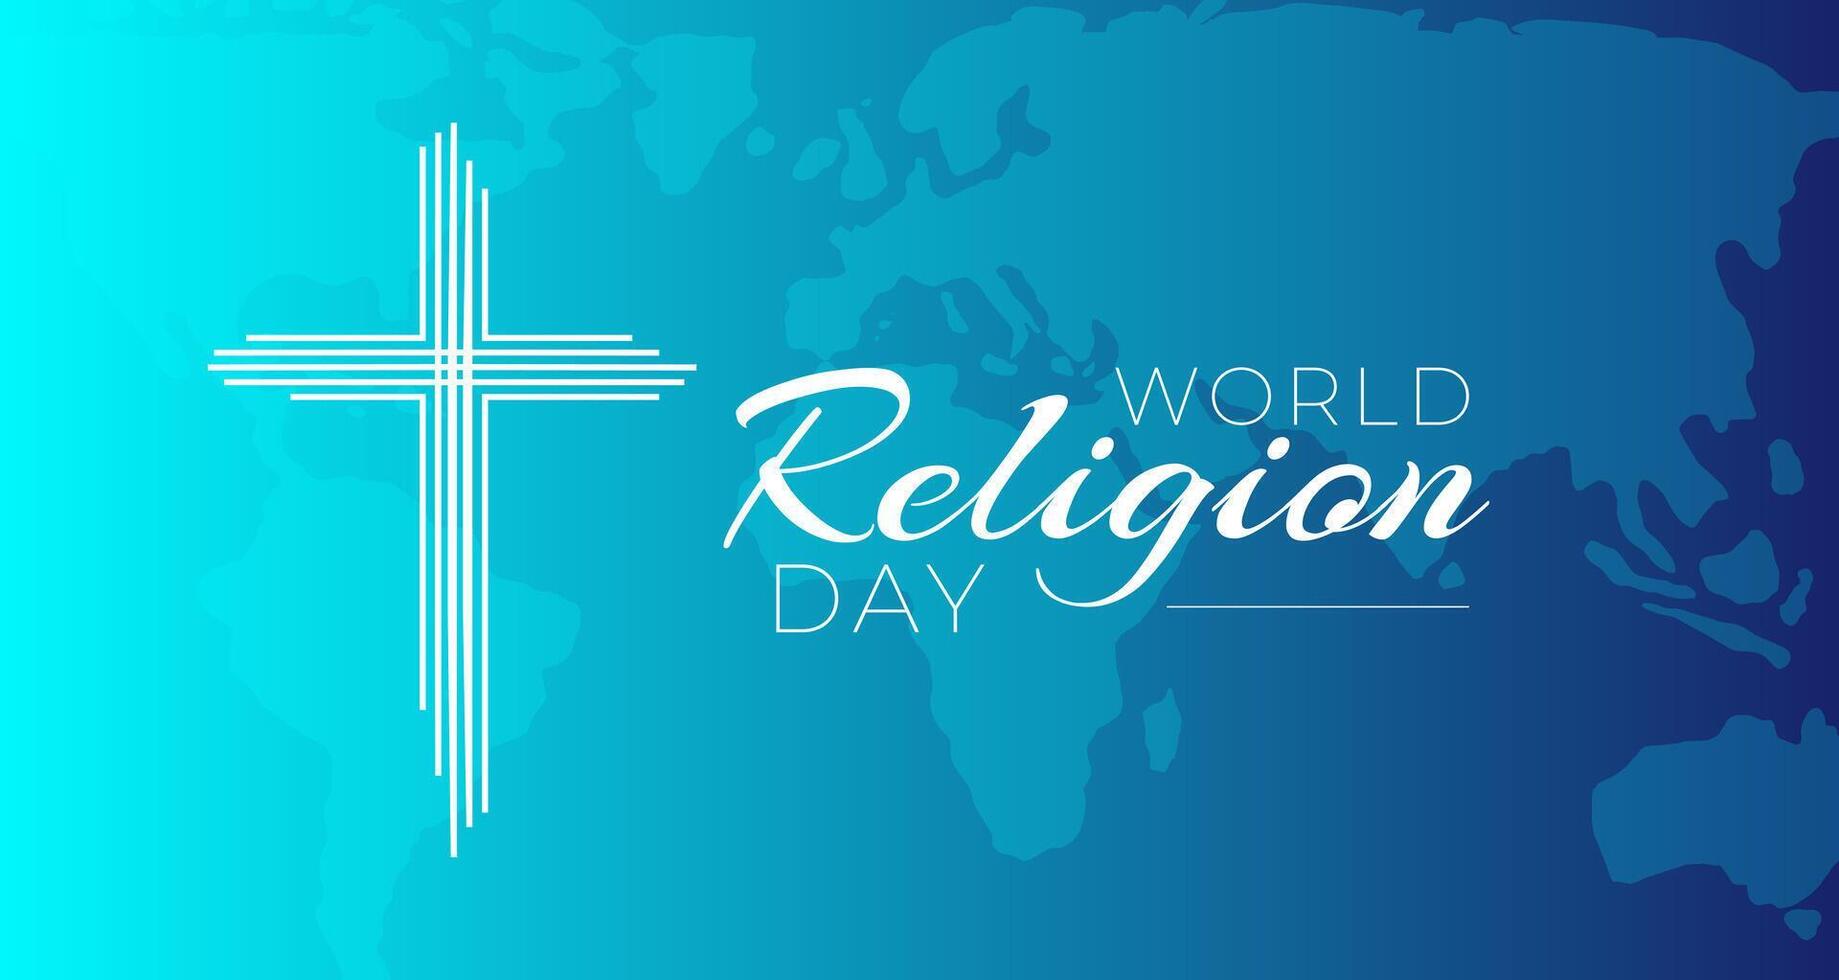 World Religion Day Background Illustration with Christian Cross vector